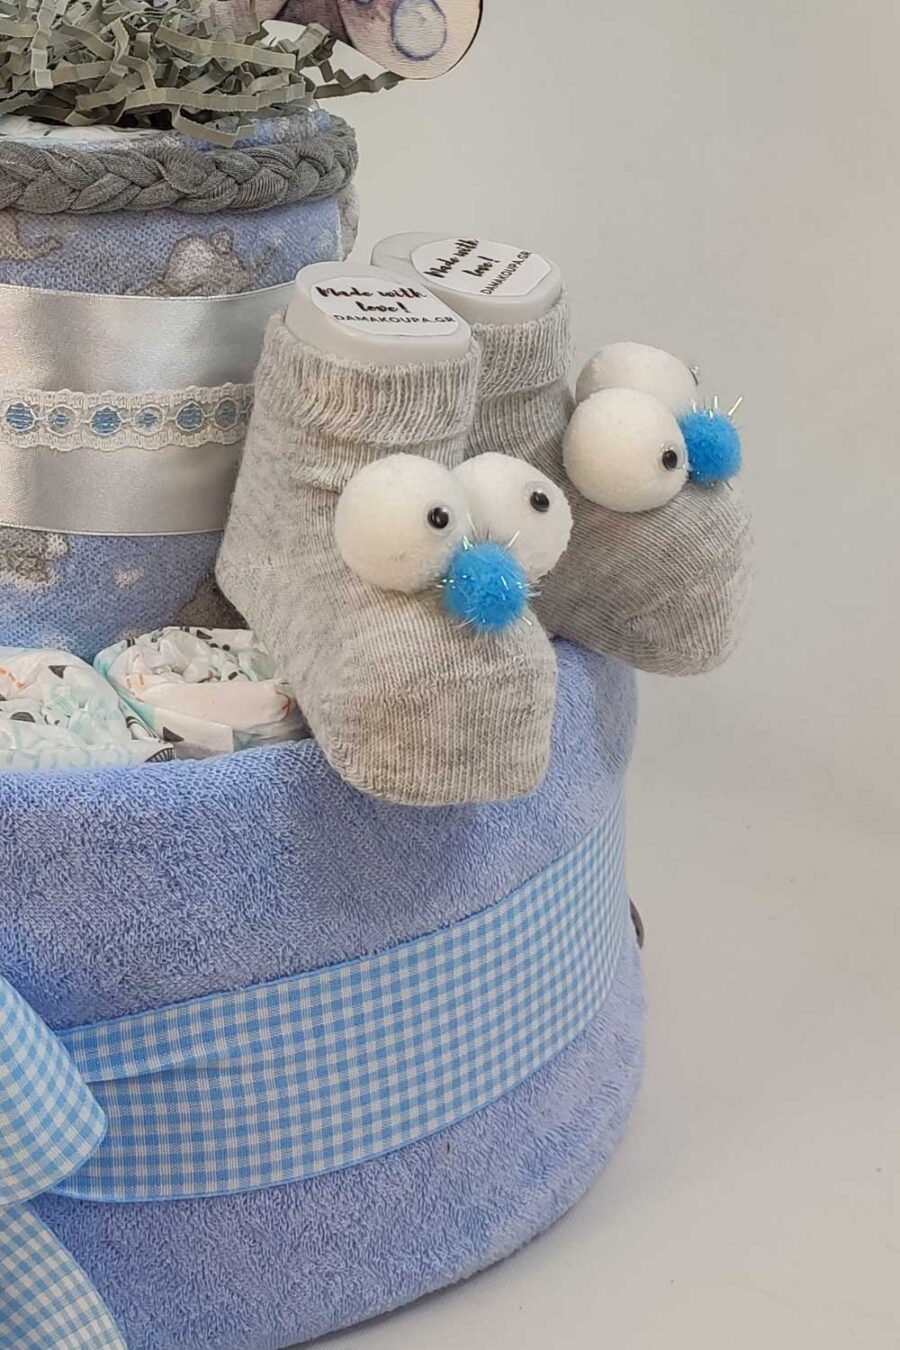 Diaper and cakes